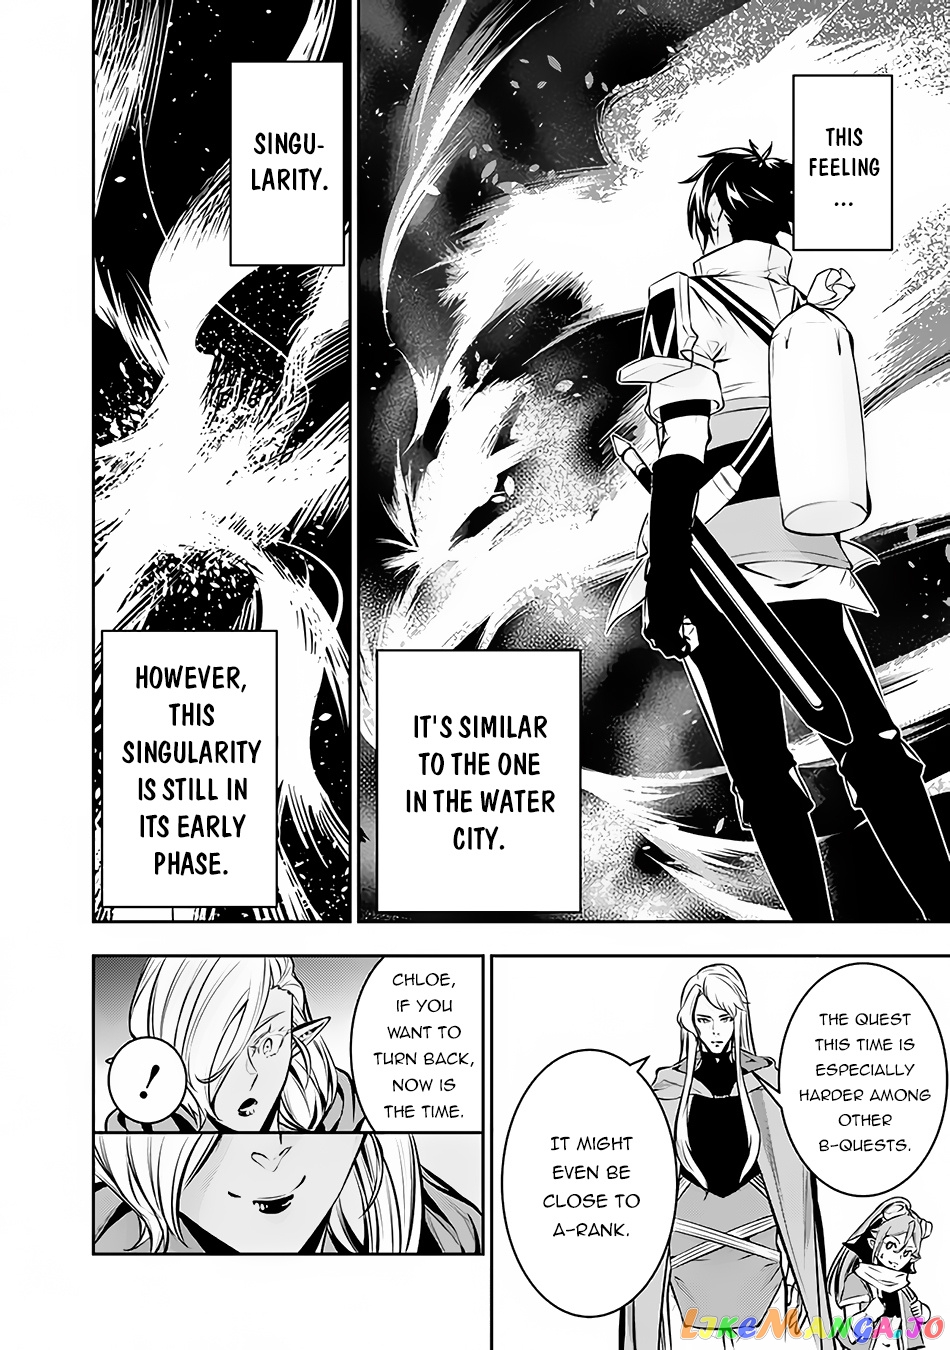 The Strongest Magical Swordsman Ever Reborn As An F-Rank Adventurer. chapter 91 - page 9